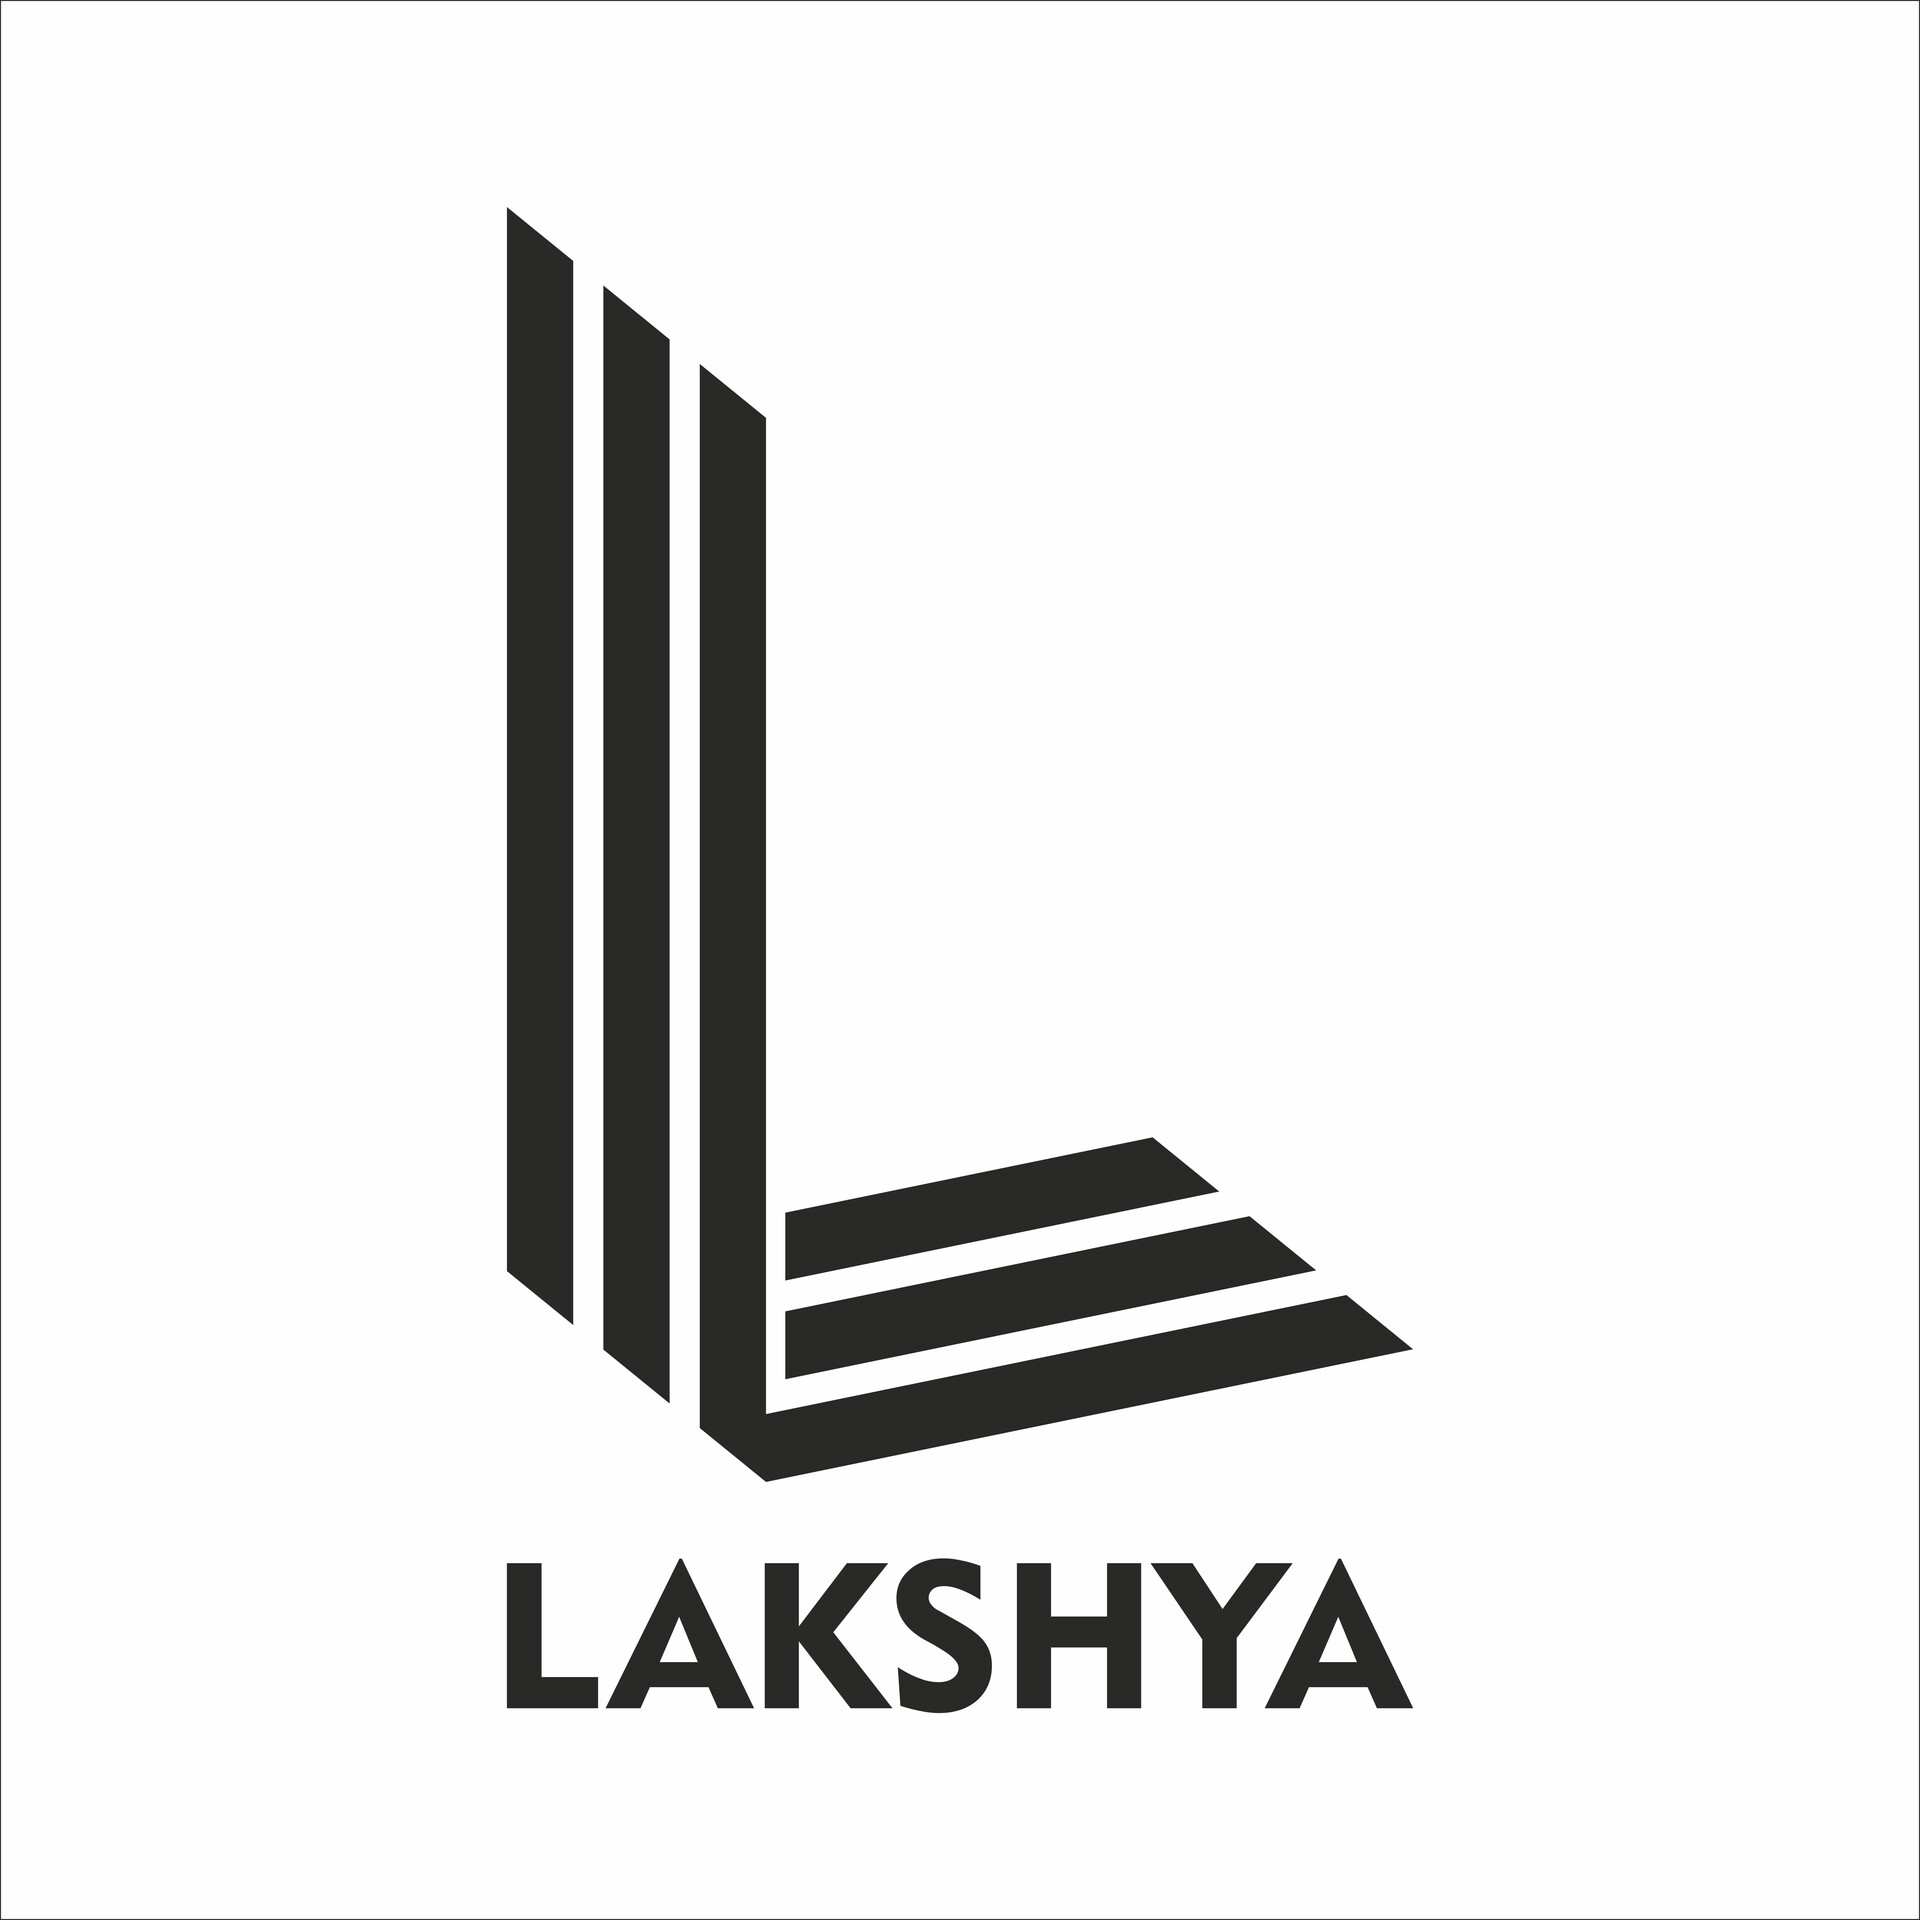 How foresight got Lakshya Digital to be part of the $80 billion gaming  sector